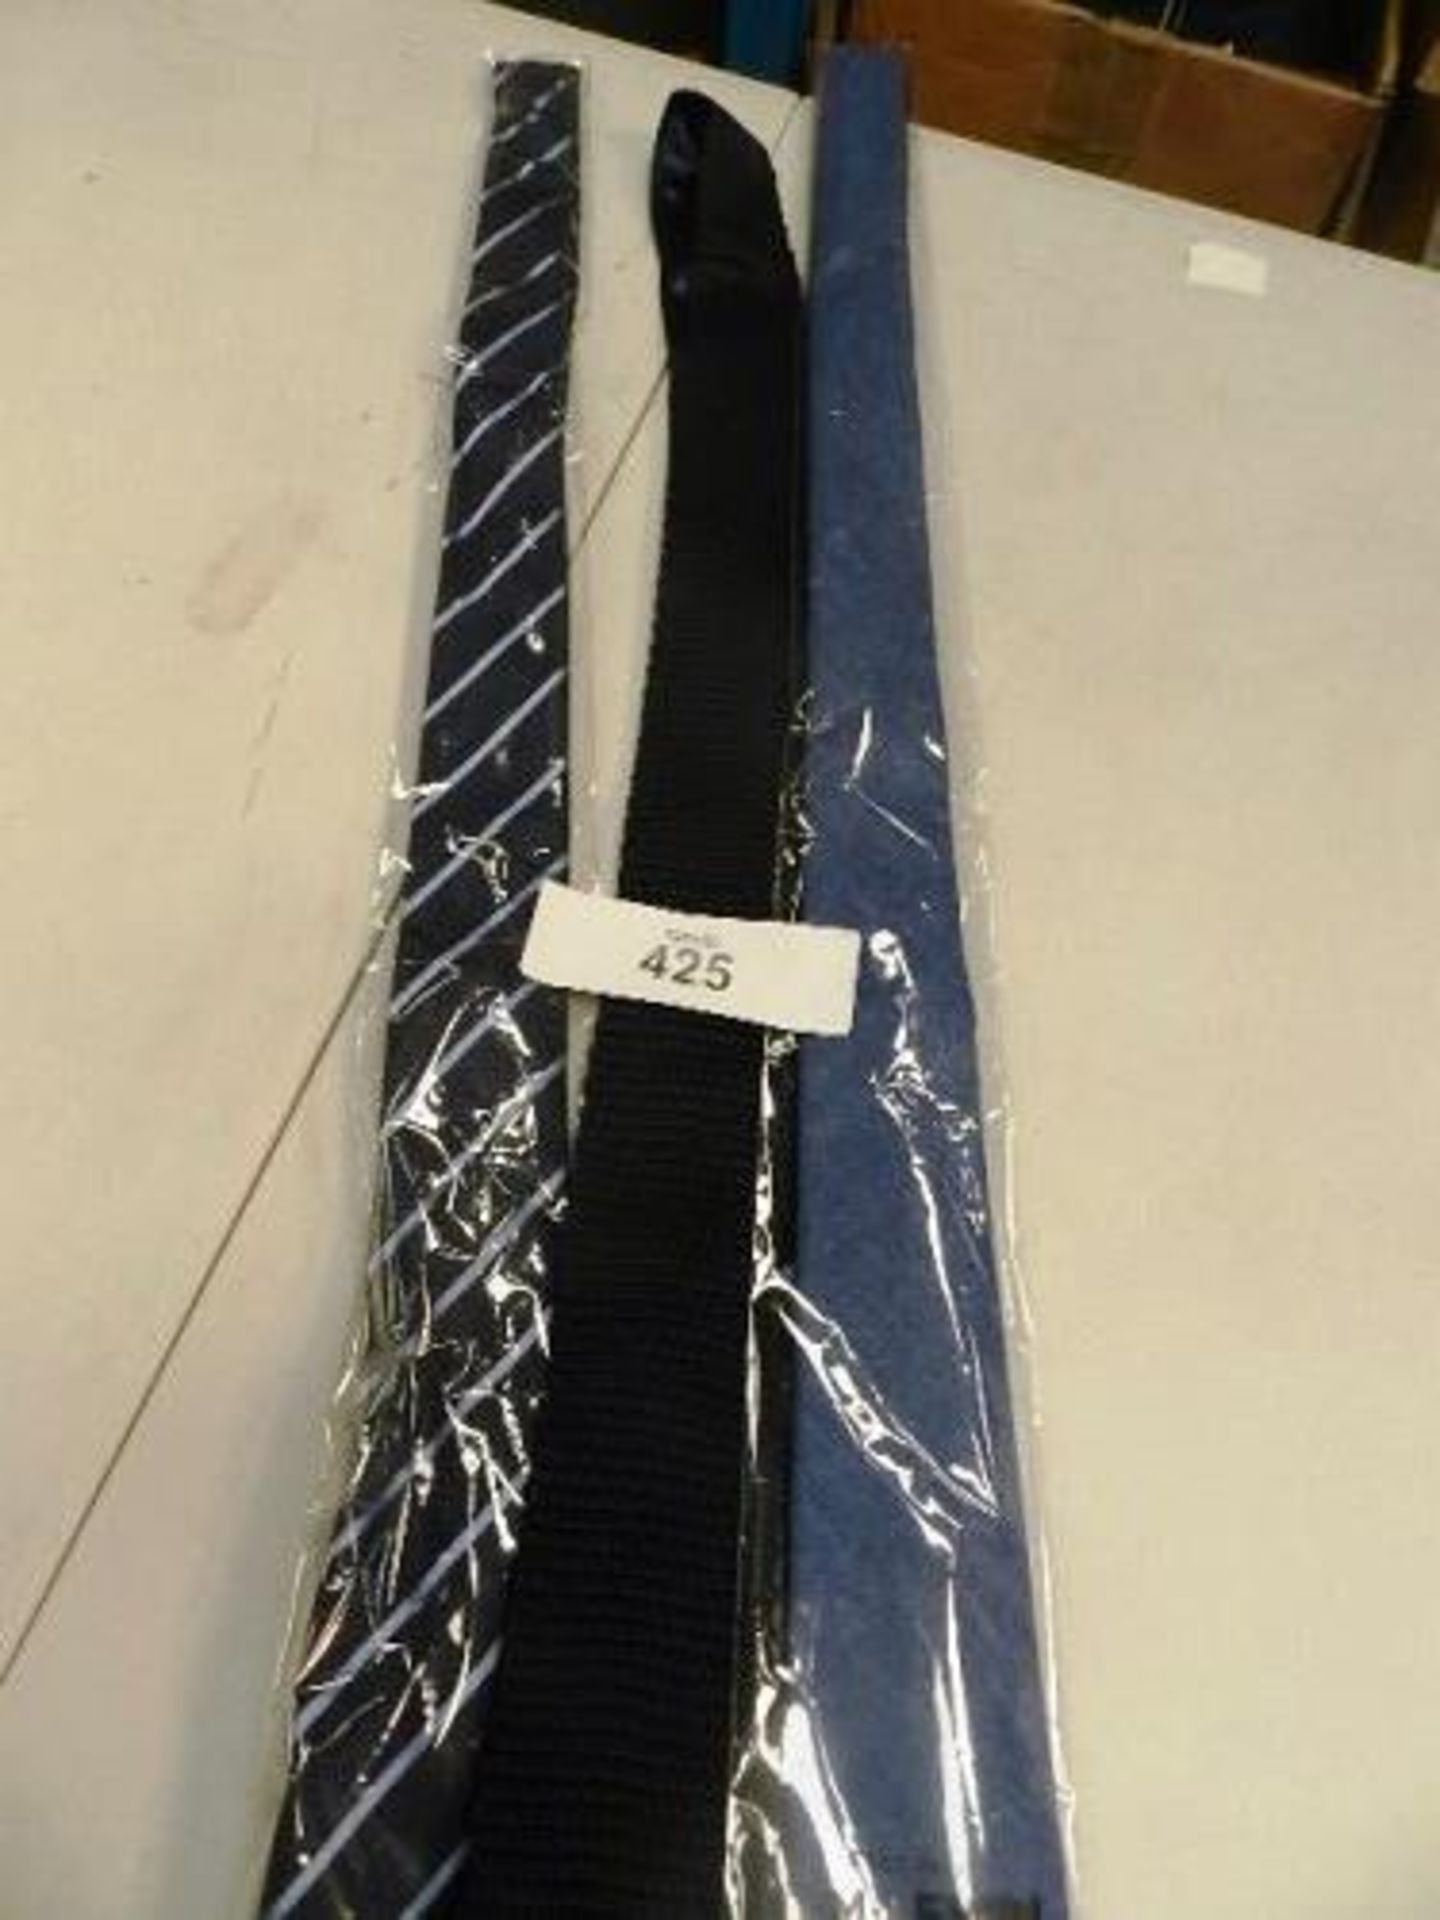 3 x T.M. Lewin ties, RRP 2 x £39.95 and 1 x £29.95 - New (ESB15A)